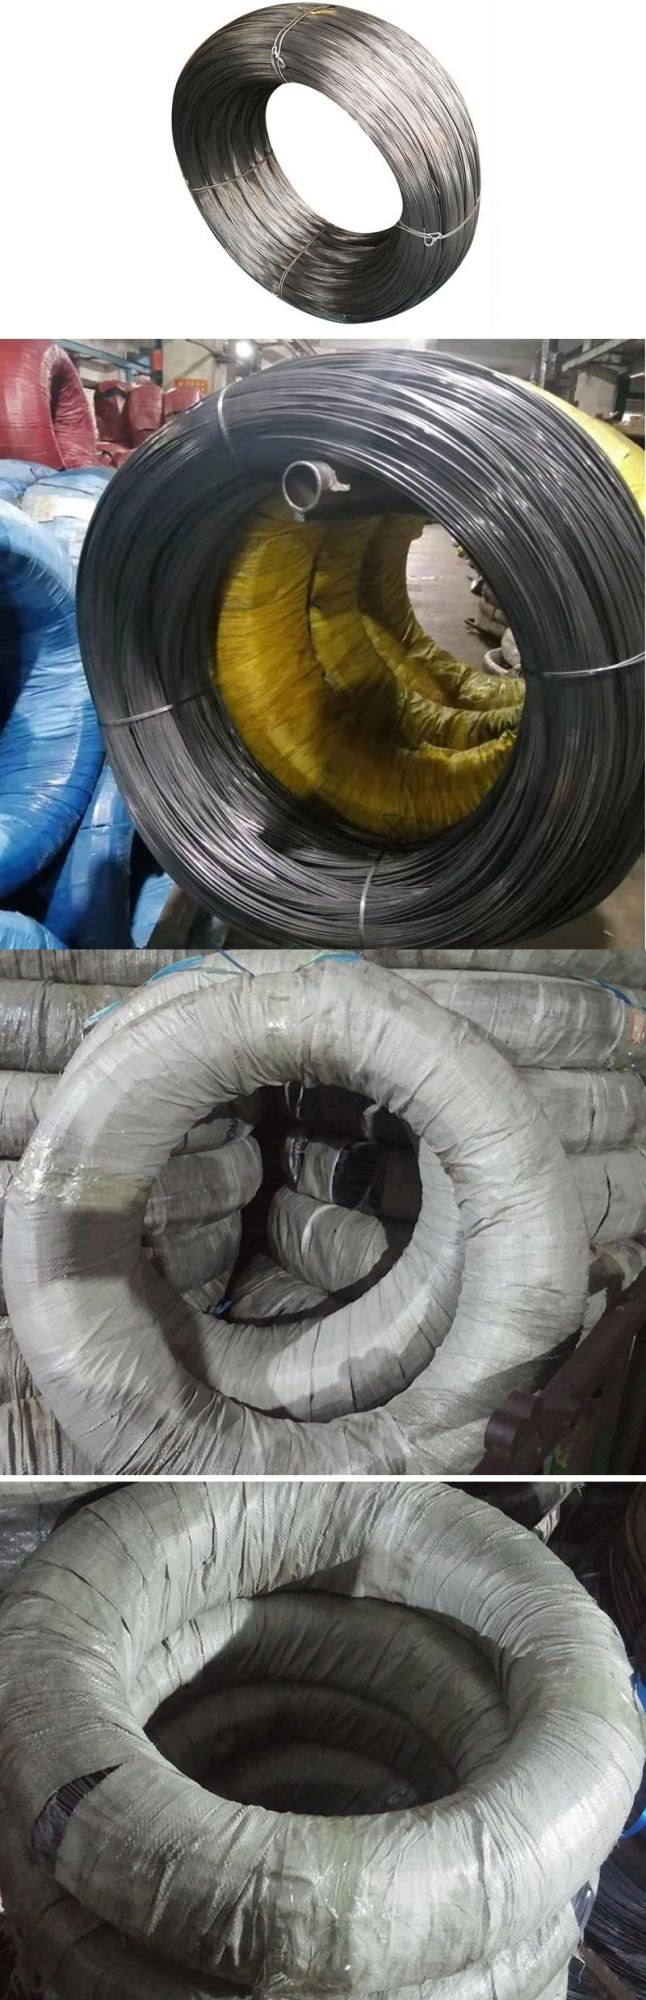 Chinese Suppliers Cold Drawn Steel Wire for Mattress